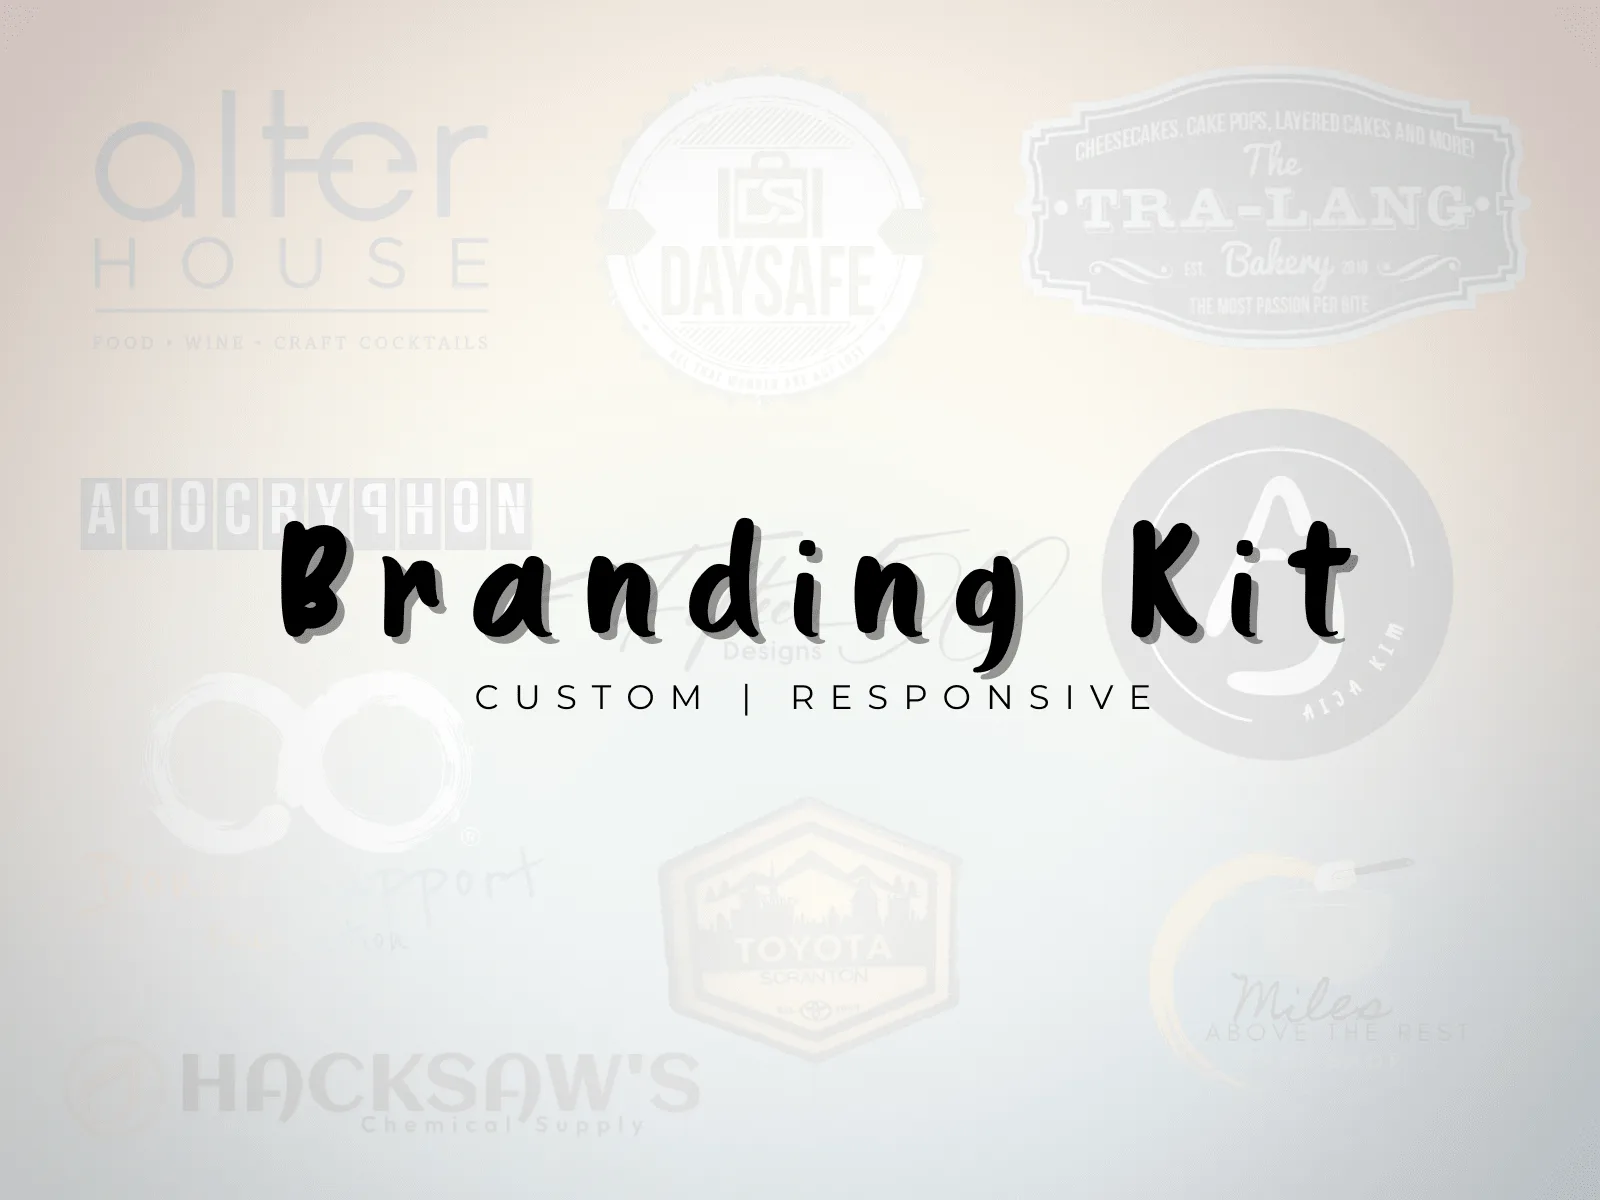 Full Branding Kit, a service by Travis Langlois